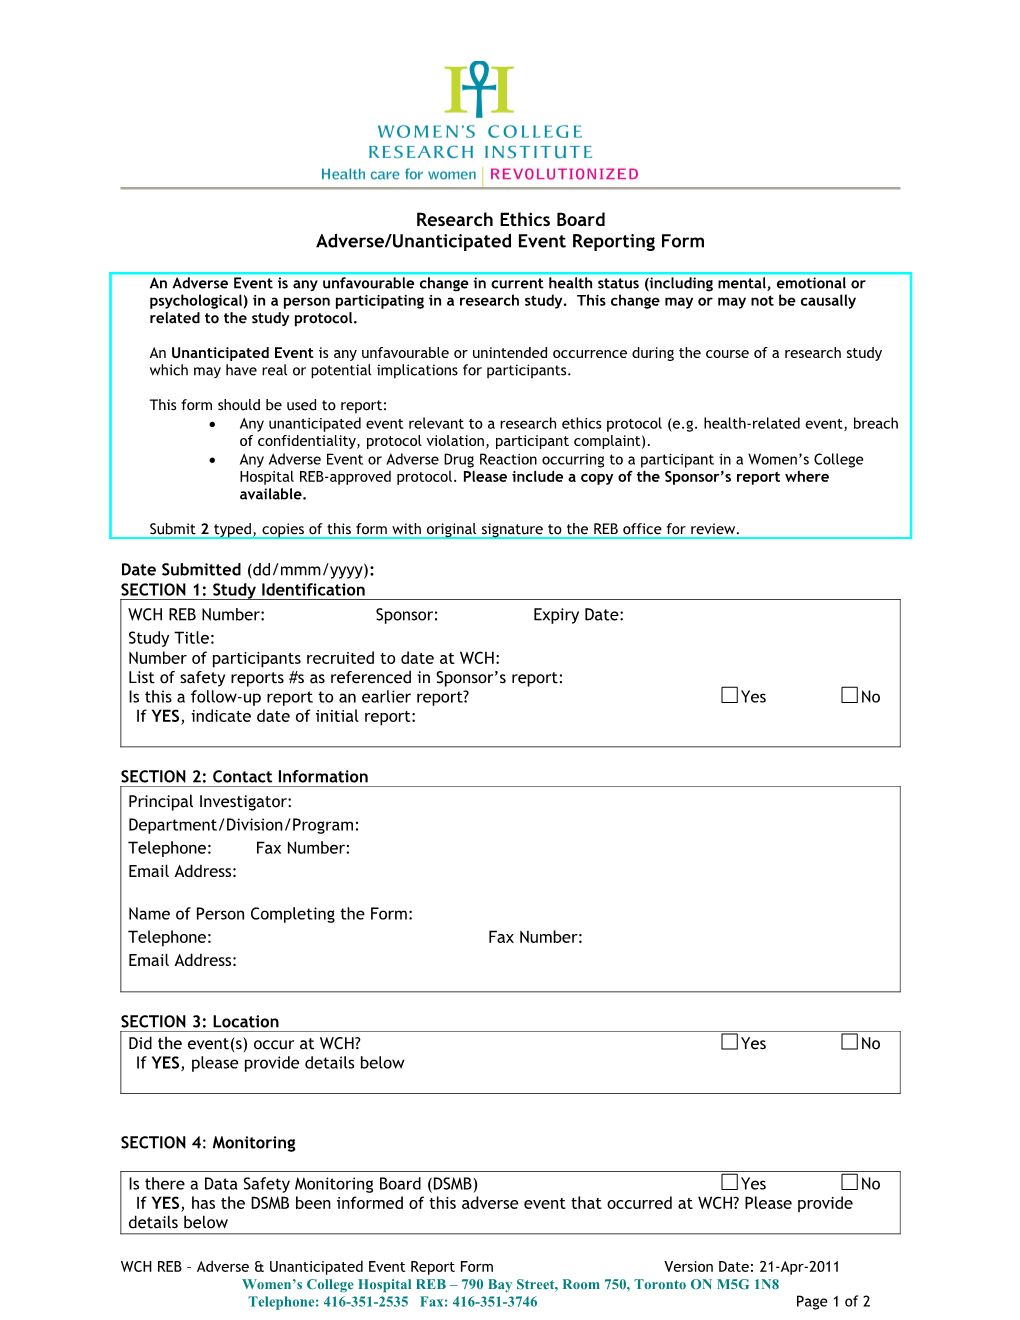 Adverse/Unanticipated Event Reporting Form